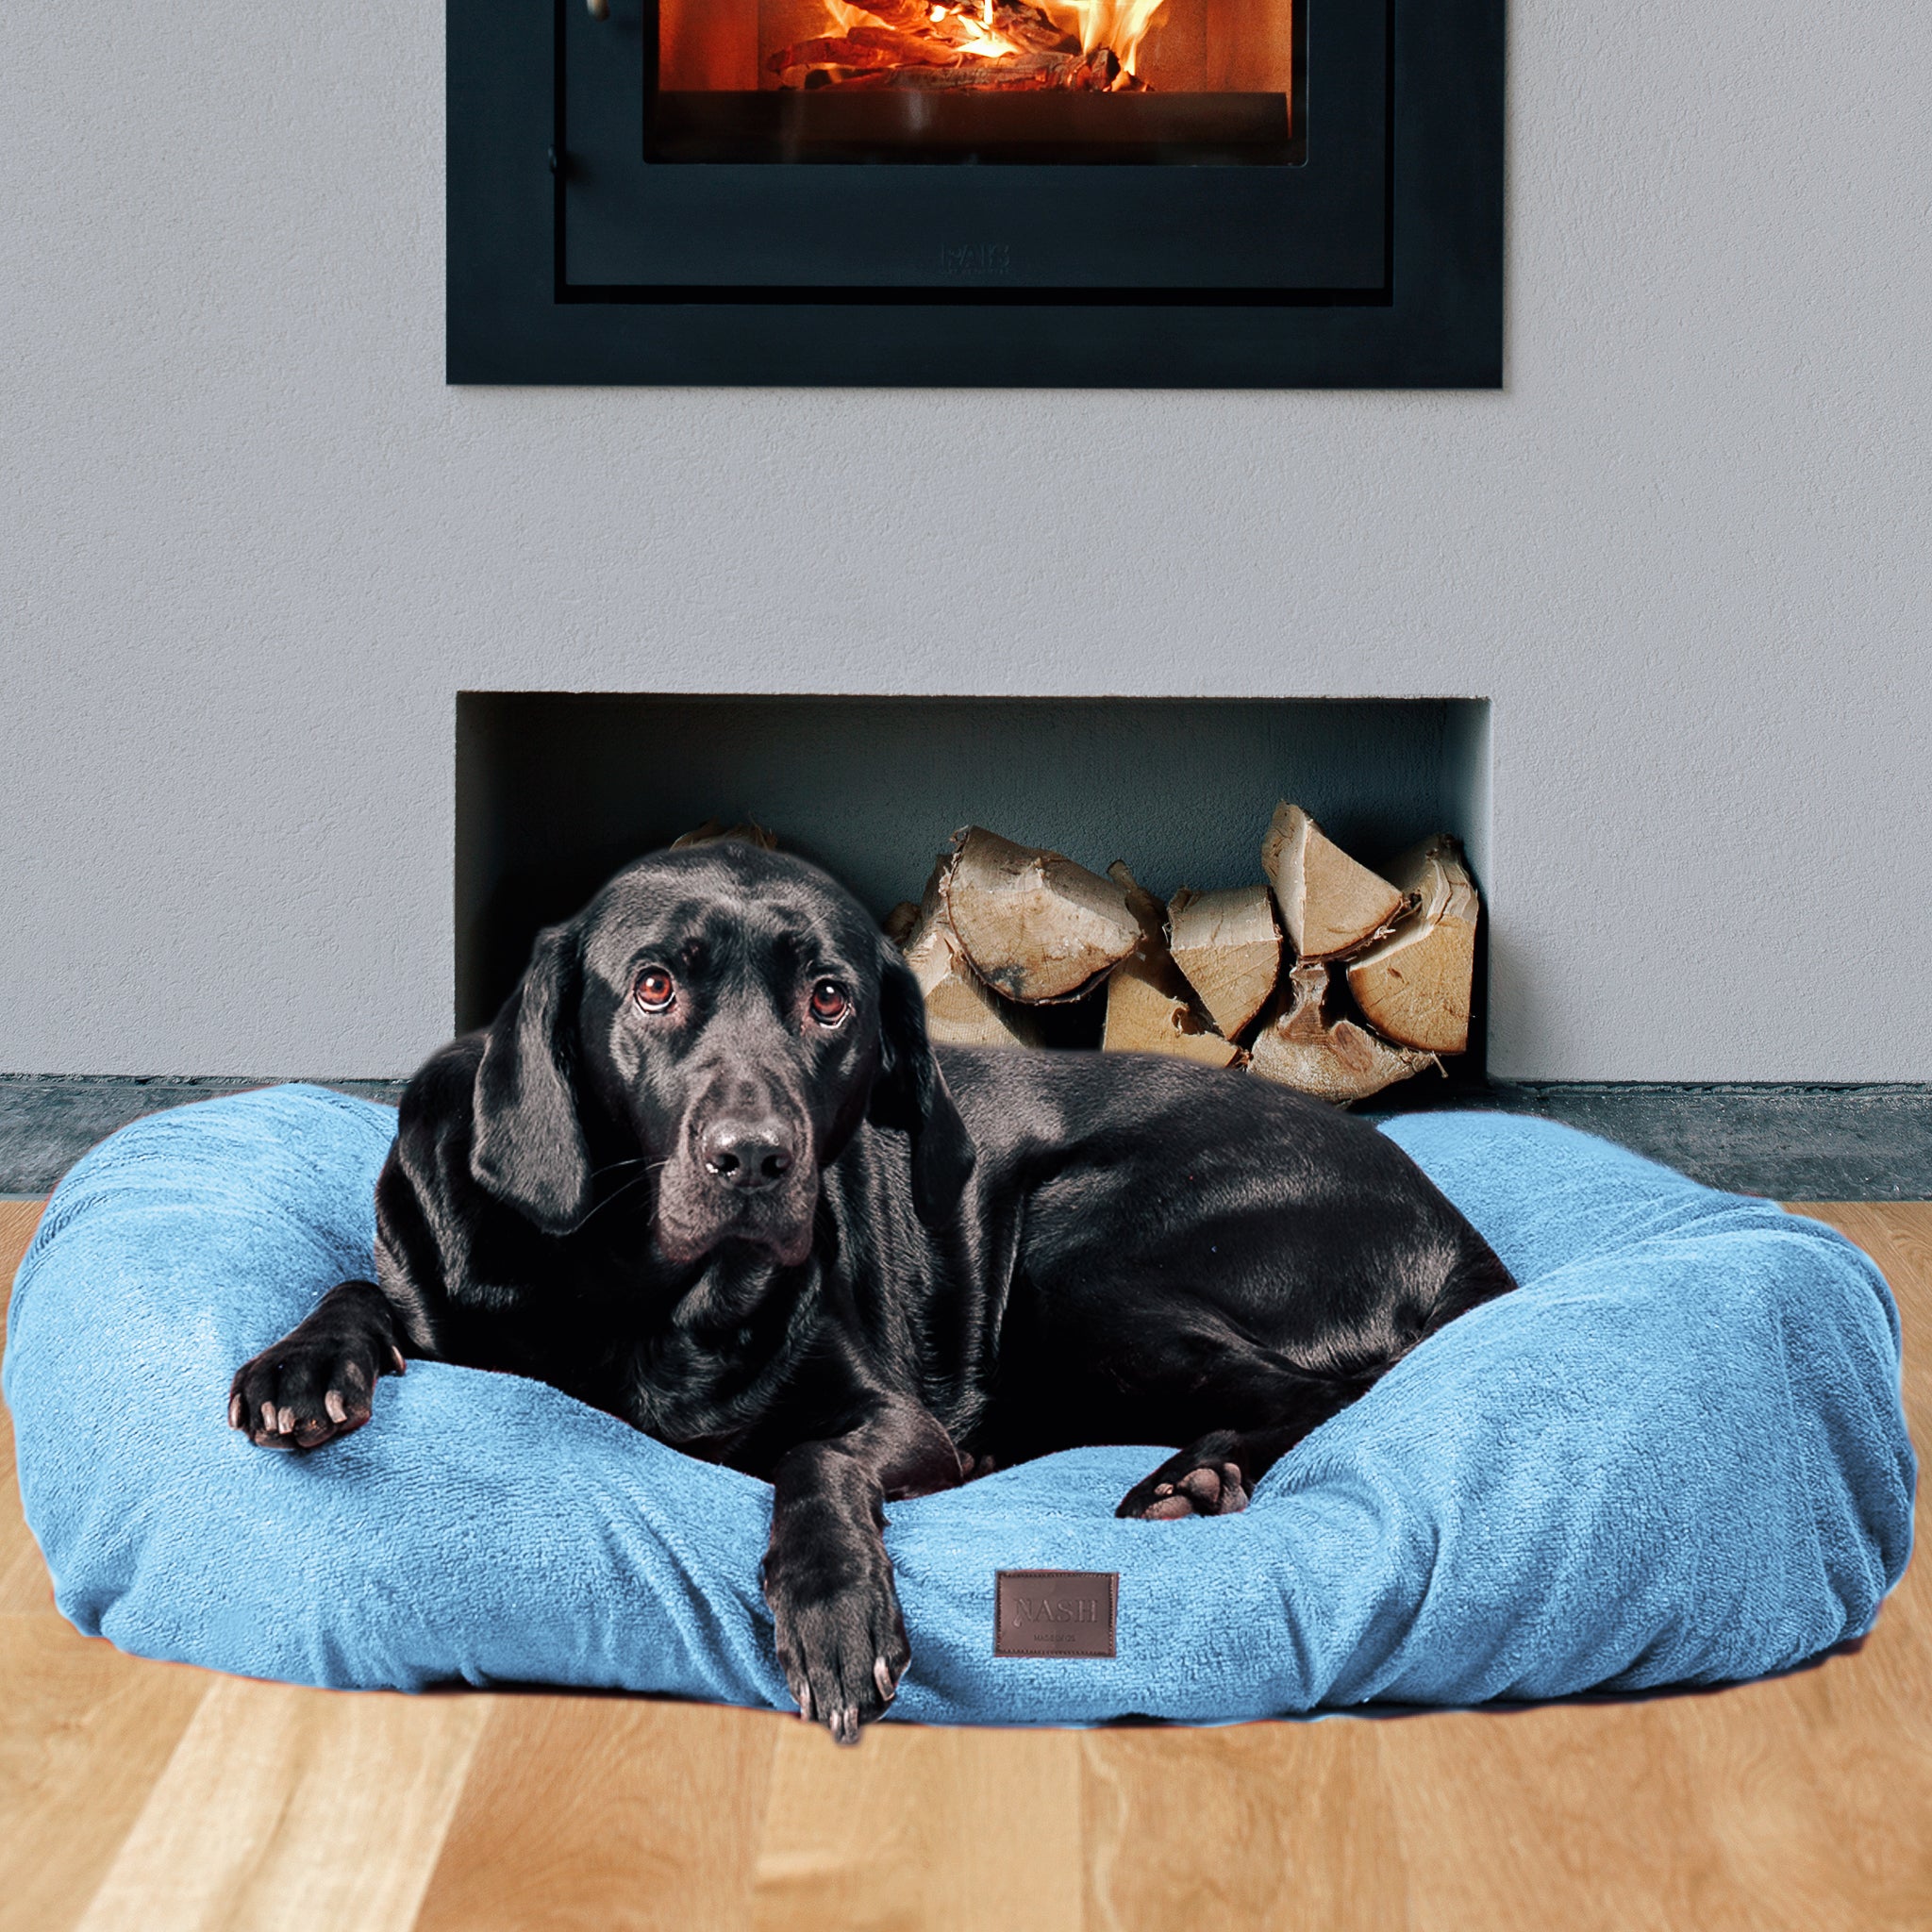 Black Labrador at home lying on a dog bed with NASH Cambridge blue dog bed cover.